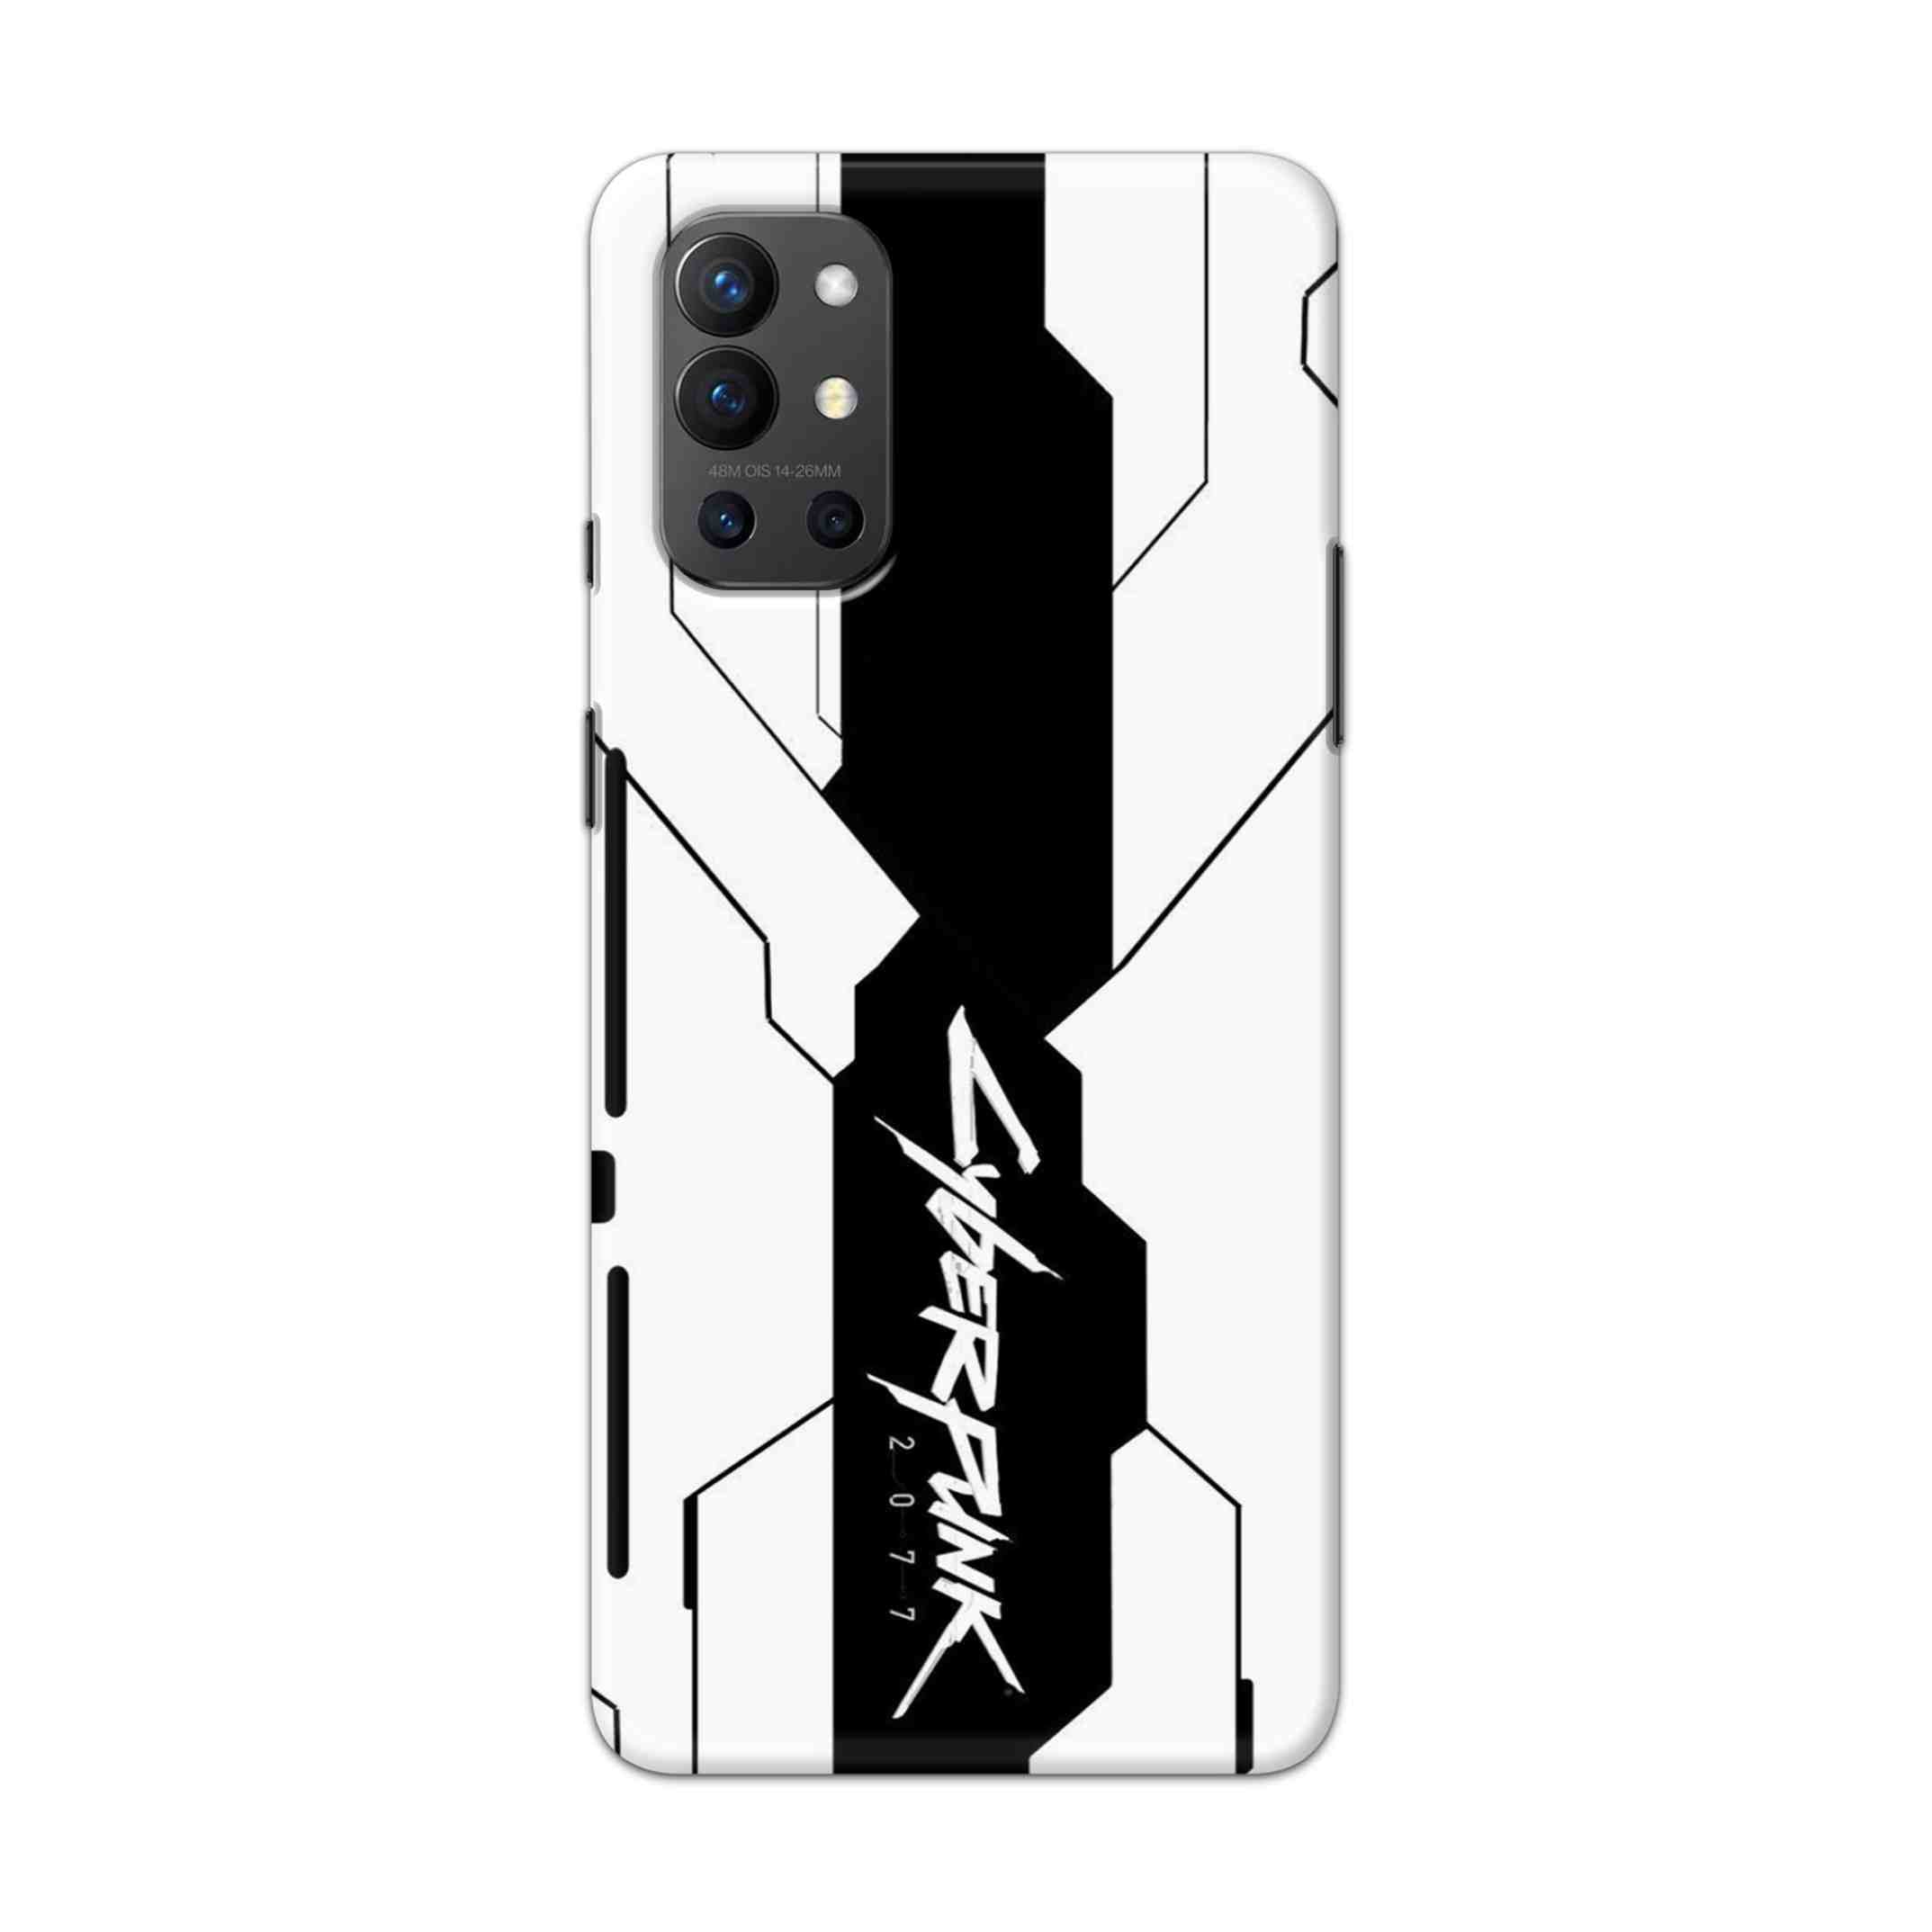 Buy Cyberpunk 2077 Hard Back Mobile Phone Case Cover For OnePlus 9R / 8T Online